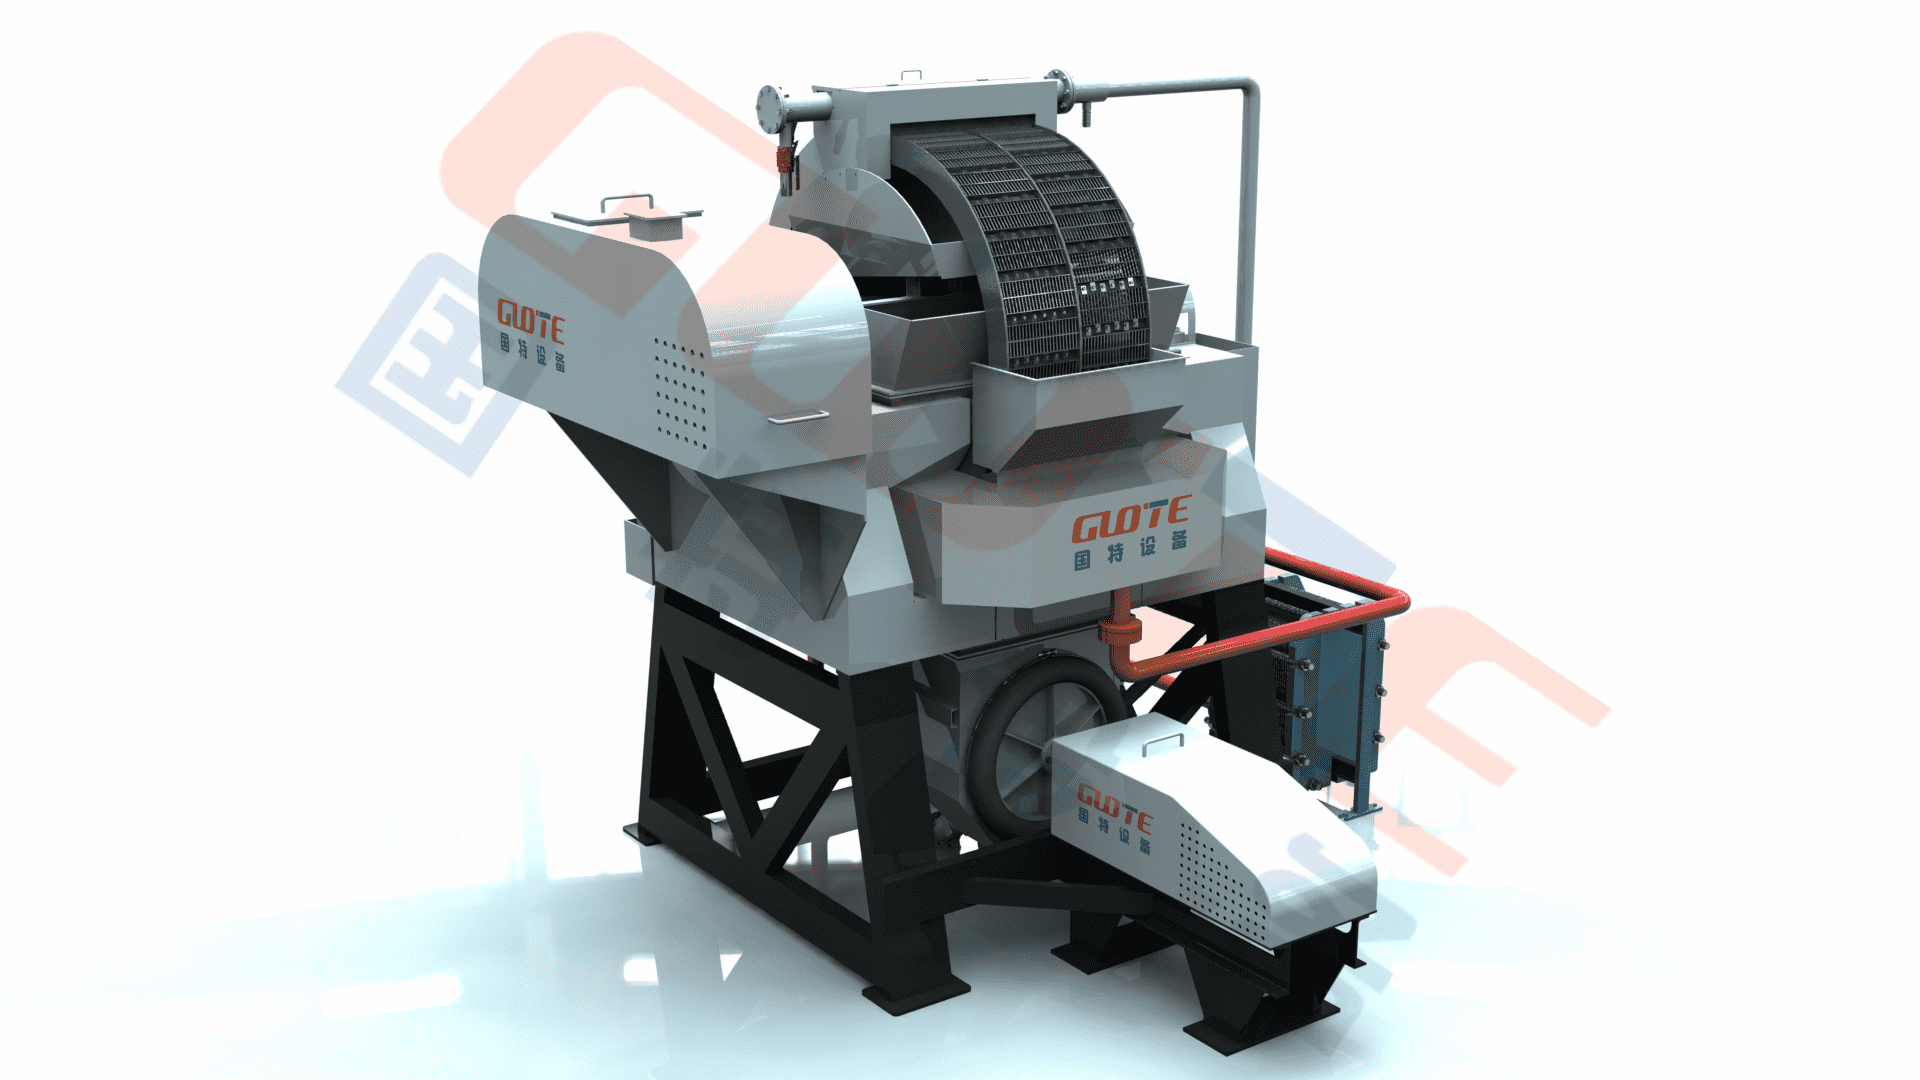 Cheapest Price Permanent Iron Remover - Reasonable price China Good Quality Wet Magnetic Separator From Jxsc Mining Machinery Factory – Guote